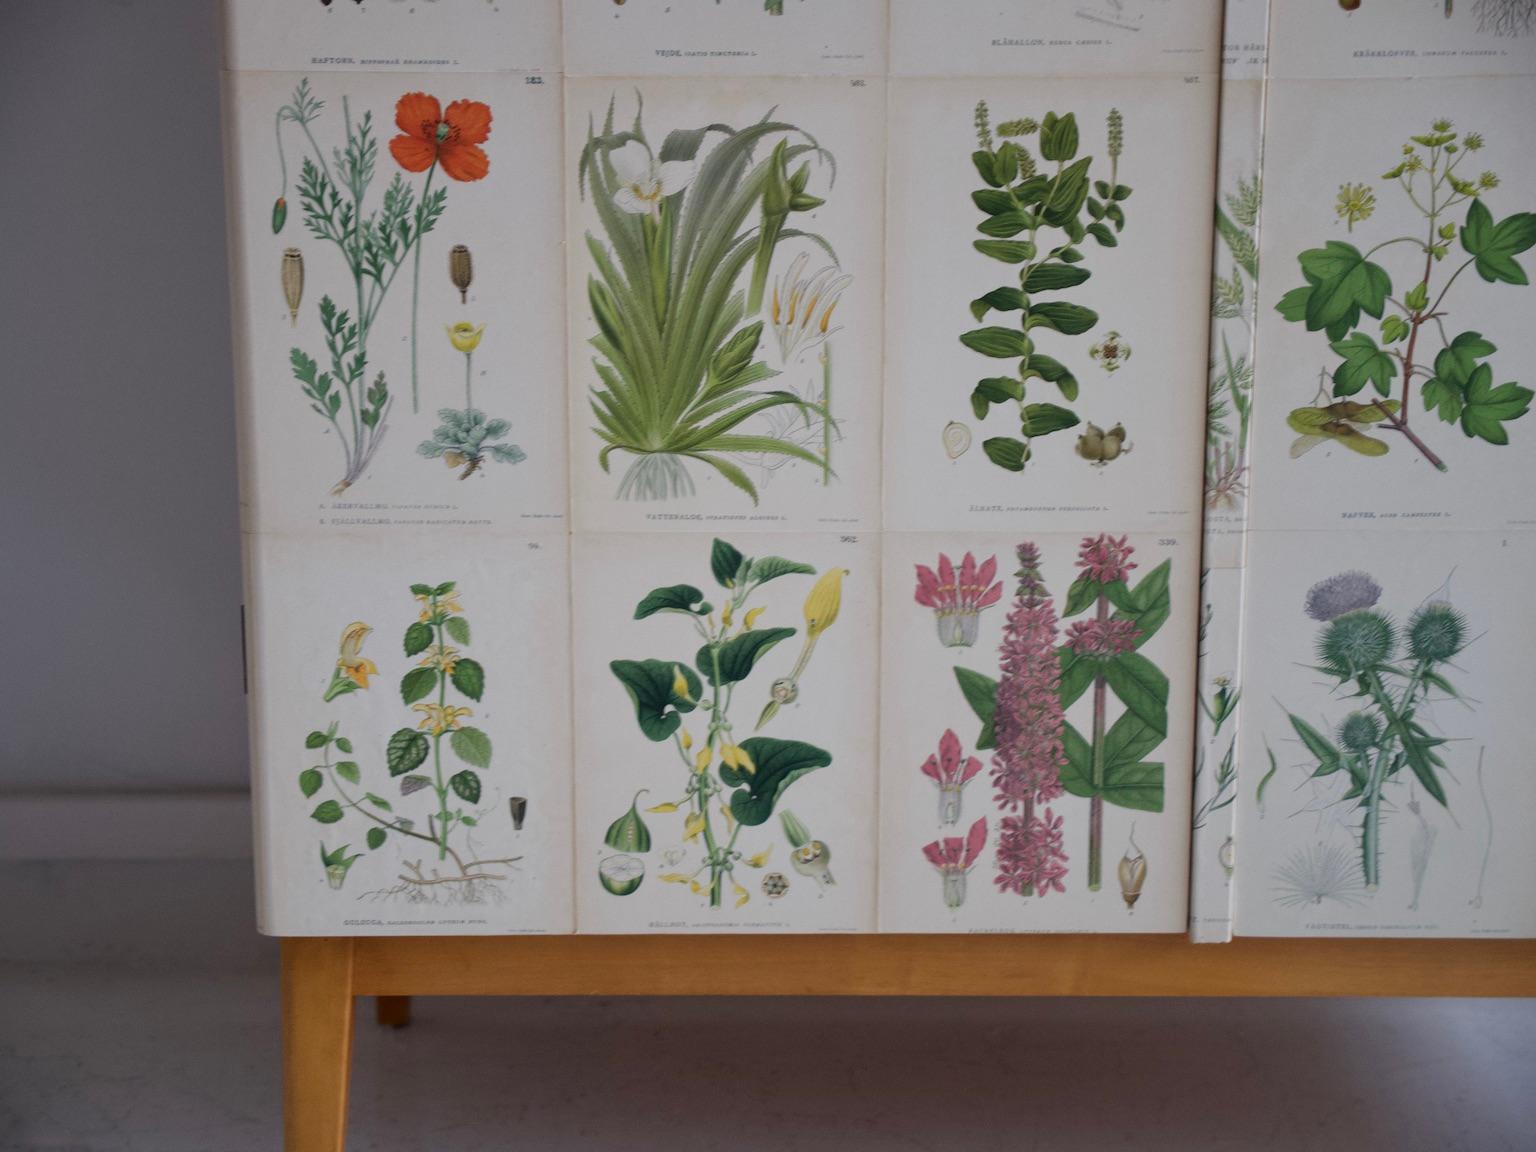 20th Century Wooden Cabinet with Nordens Flora Illustrations